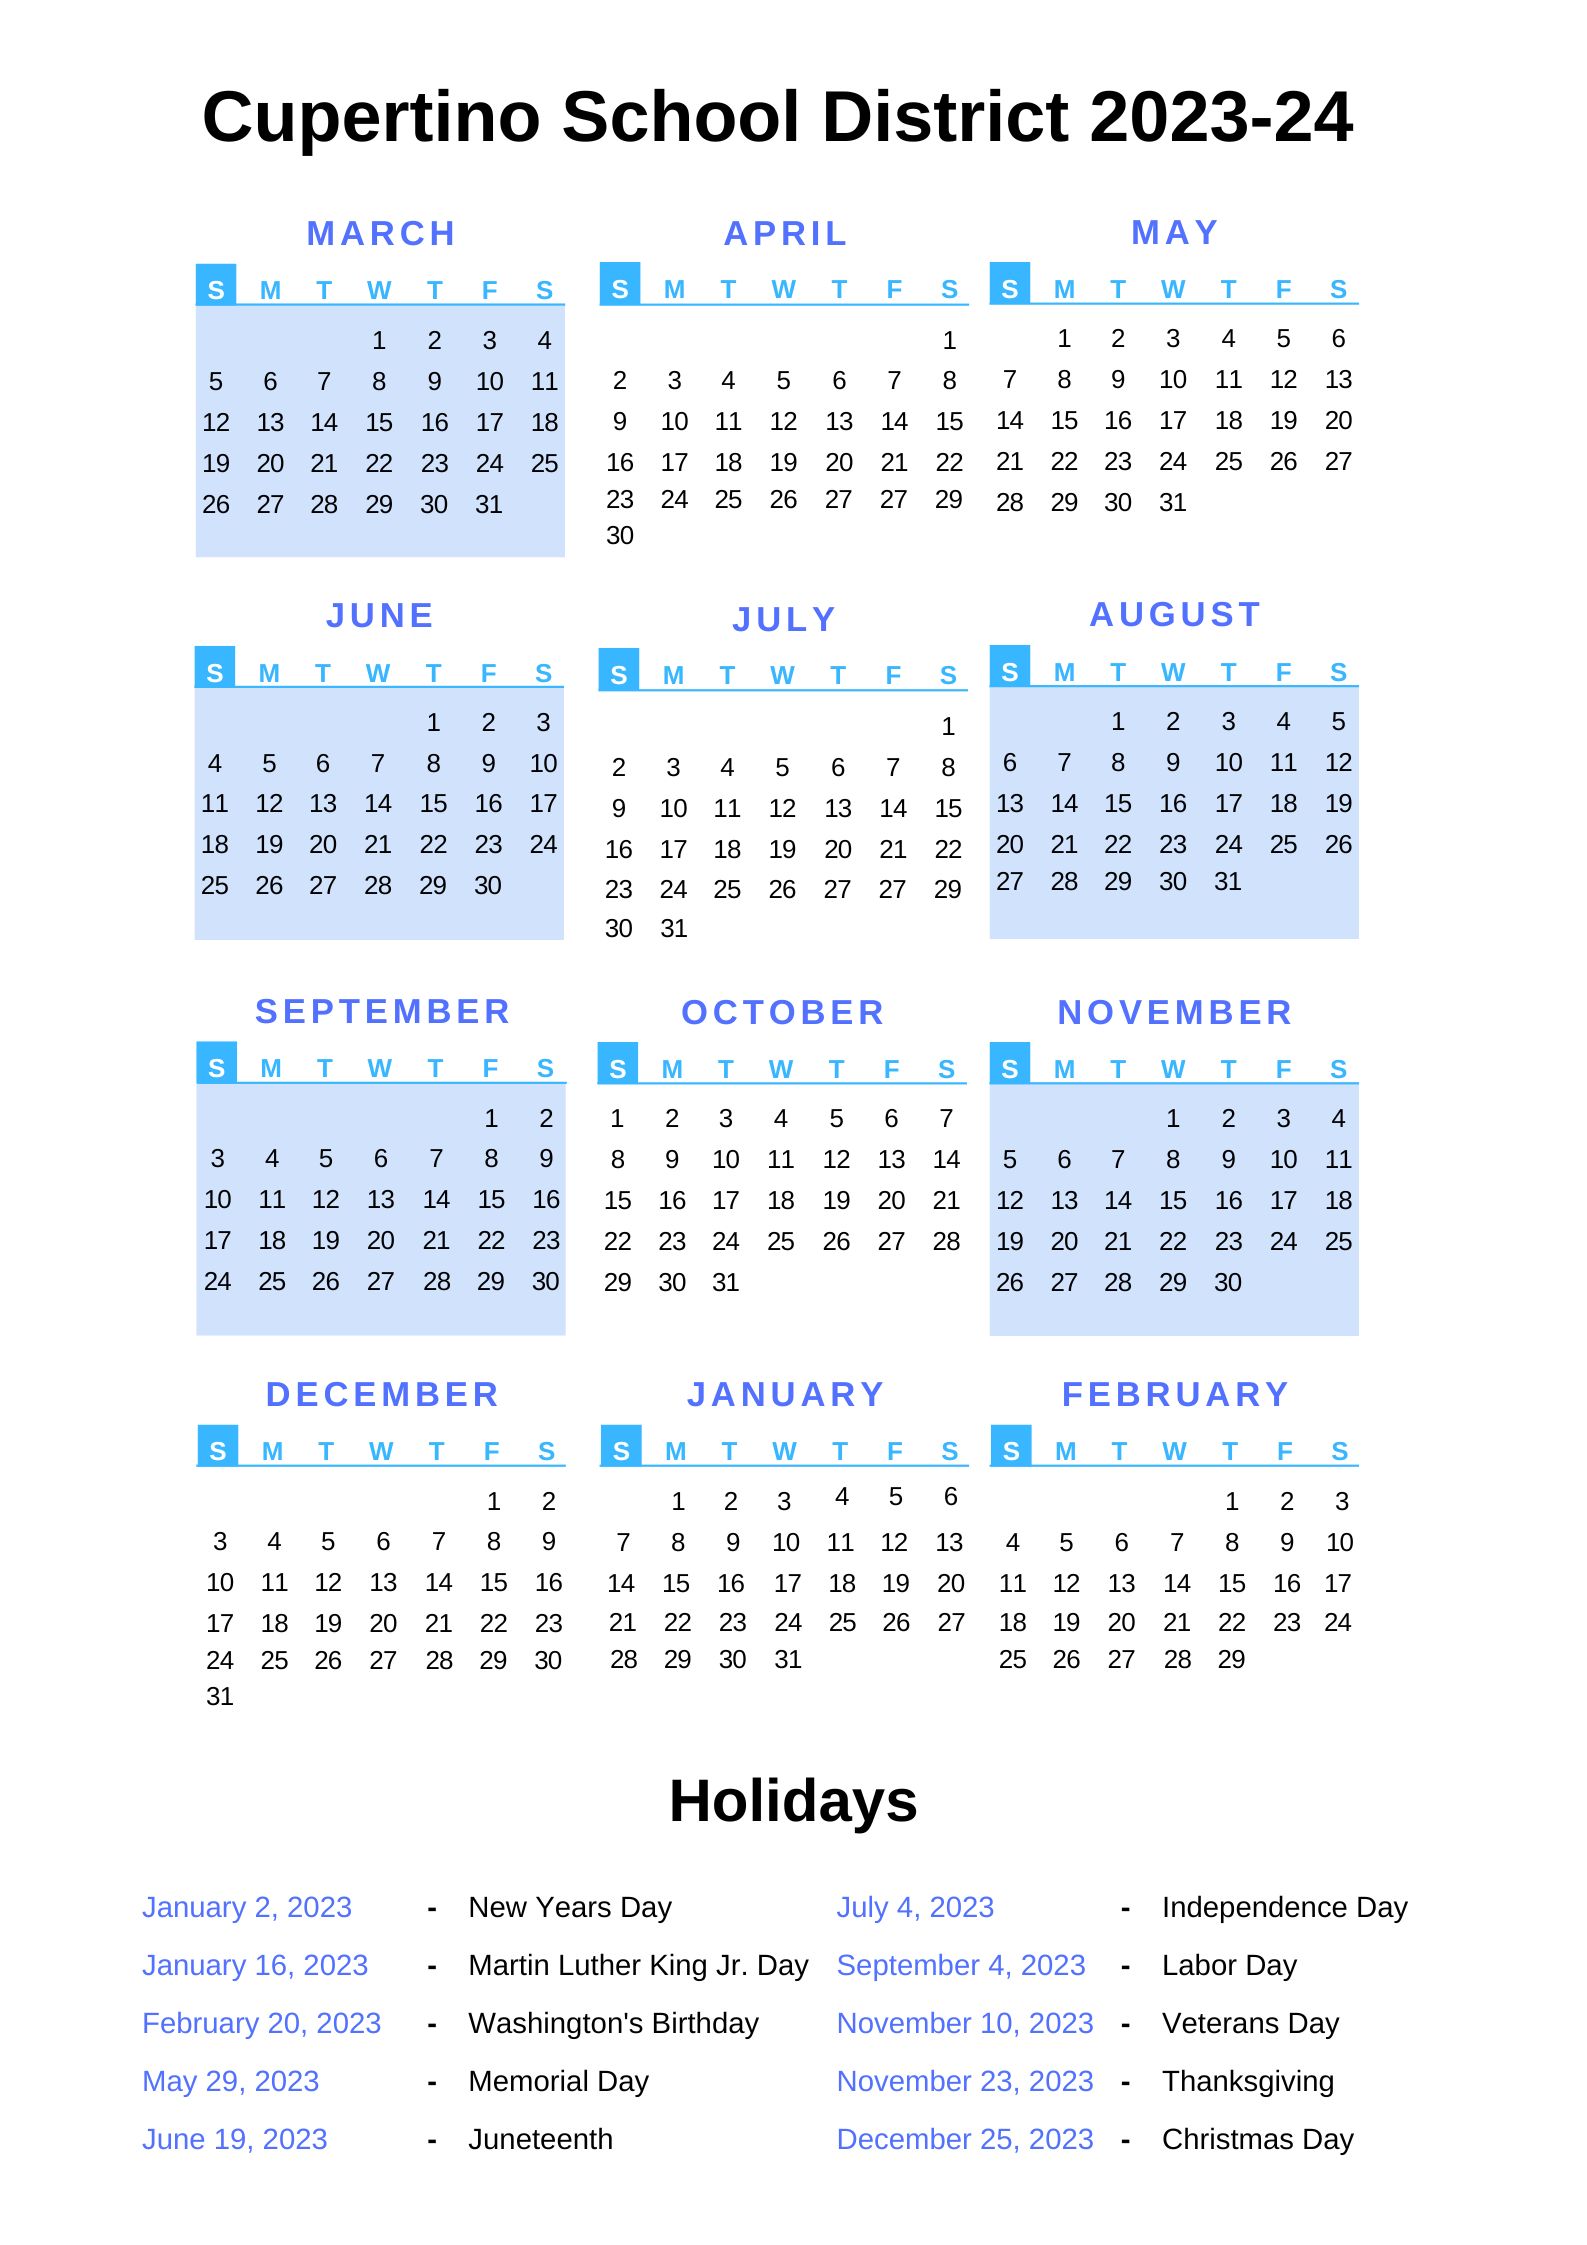 Cupertino School District Calendar 202324 With Holidays